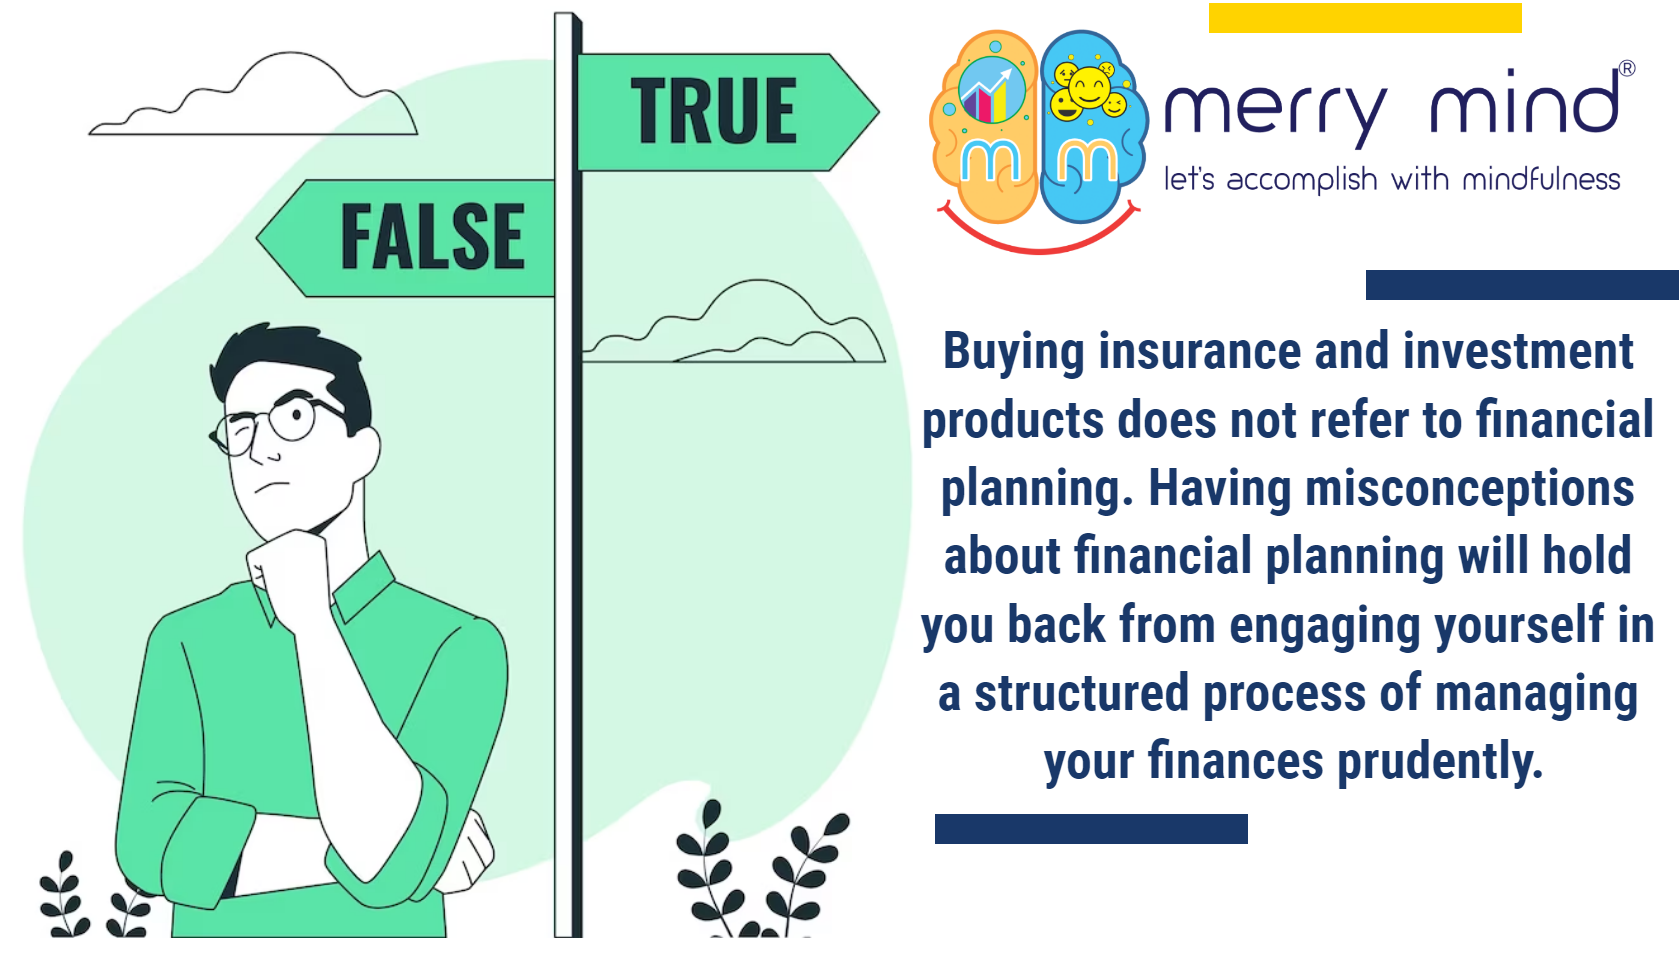 Steer clear the misconceptions about financial planning